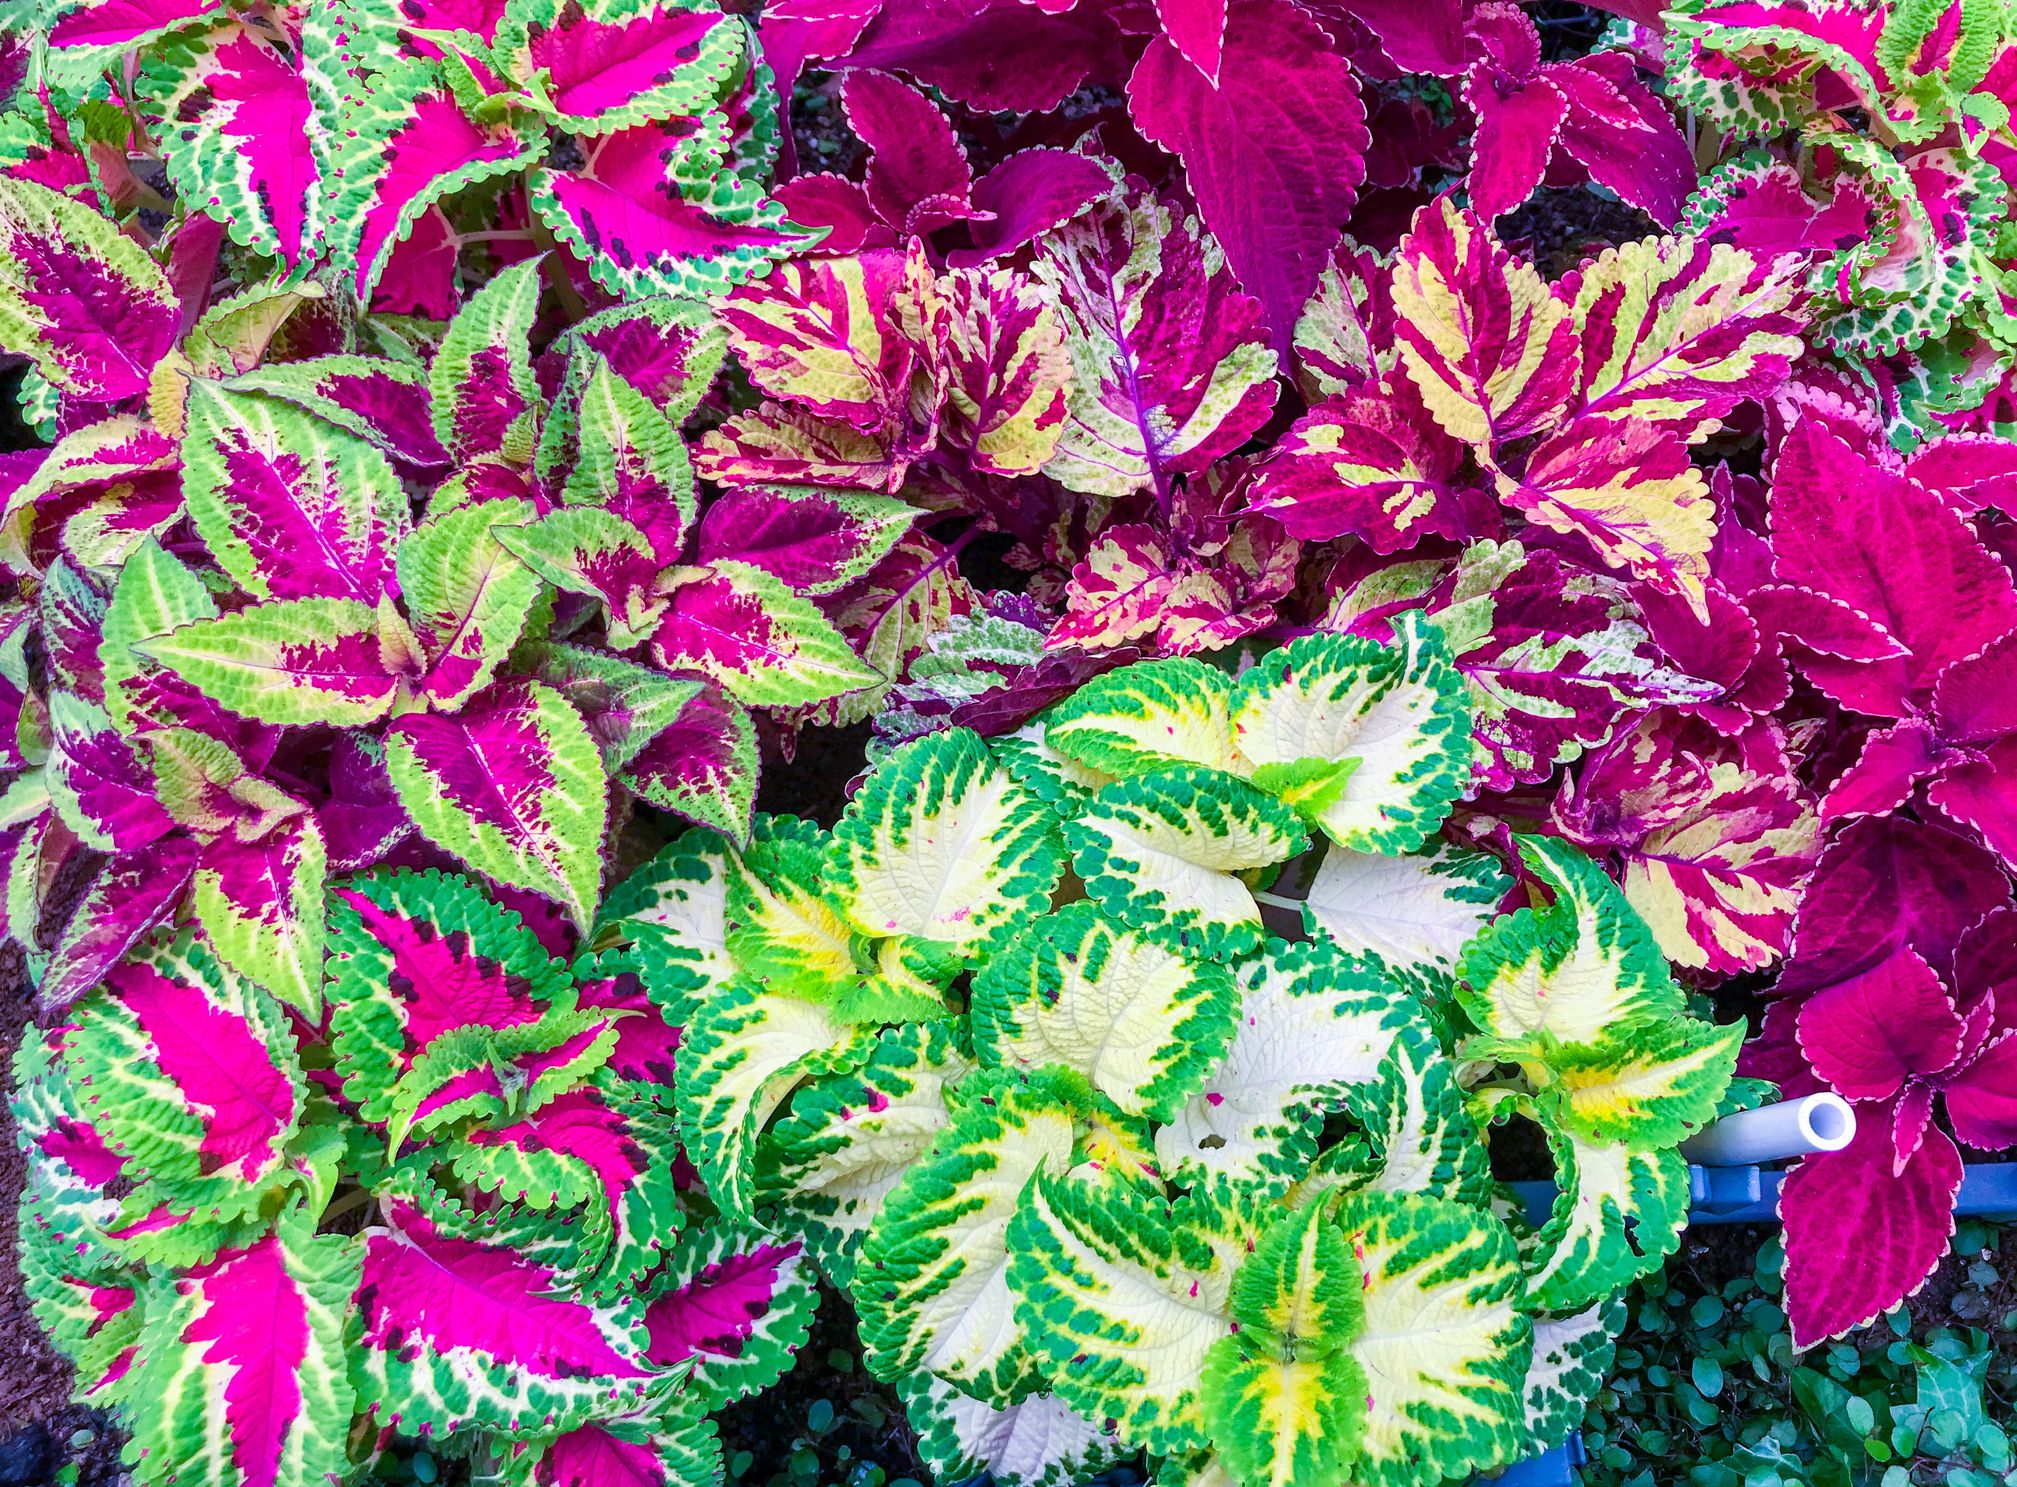 Image of Coleus annual flower that blooms all summer